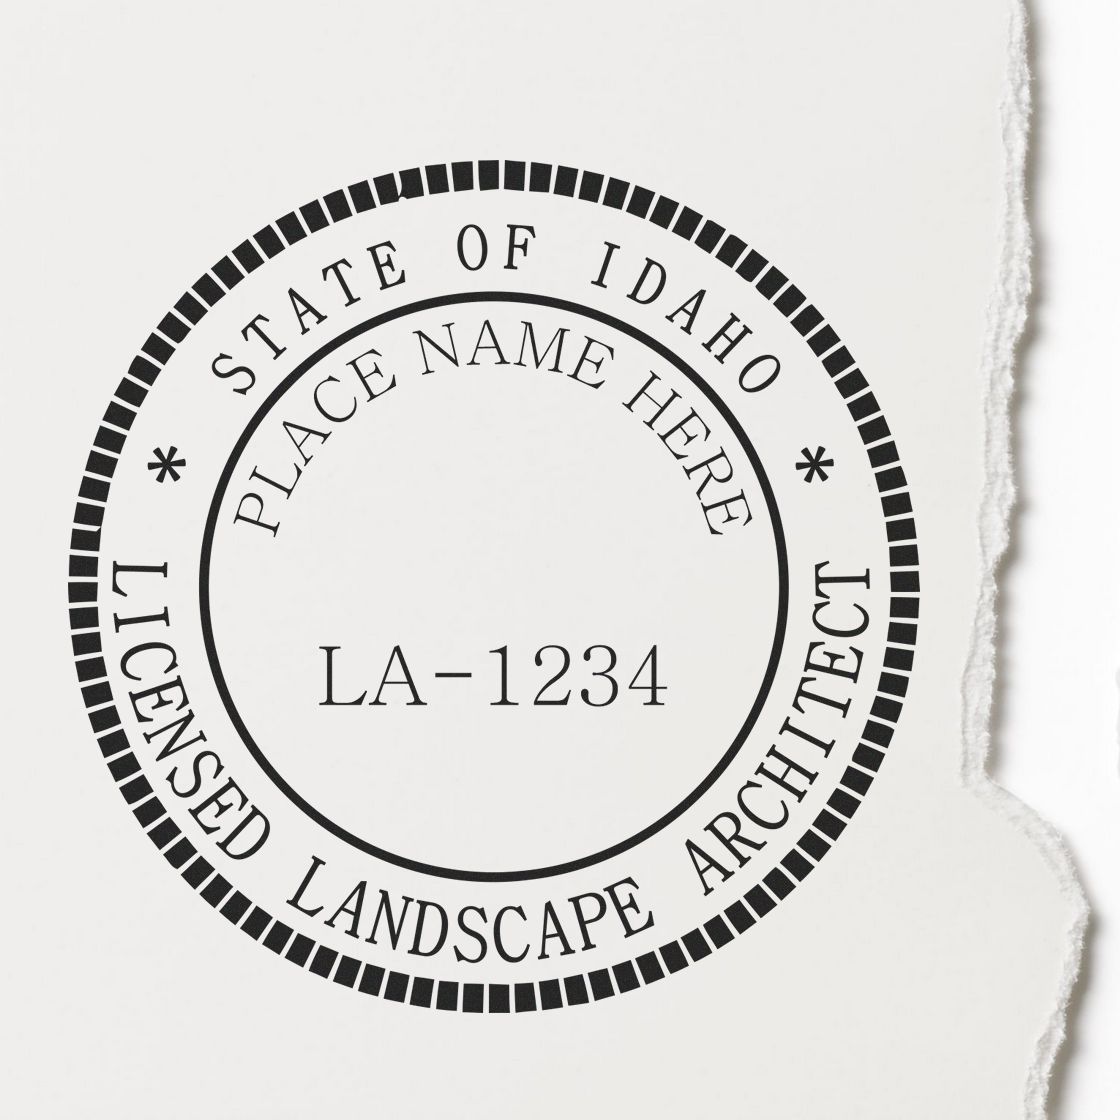 Premium MaxLight Pre-Inked Idaho Landscape Architectural Stamp in use photo showing a stamped imprint of the Premium MaxLight Pre-Inked Idaho Landscape Architectural Stamp